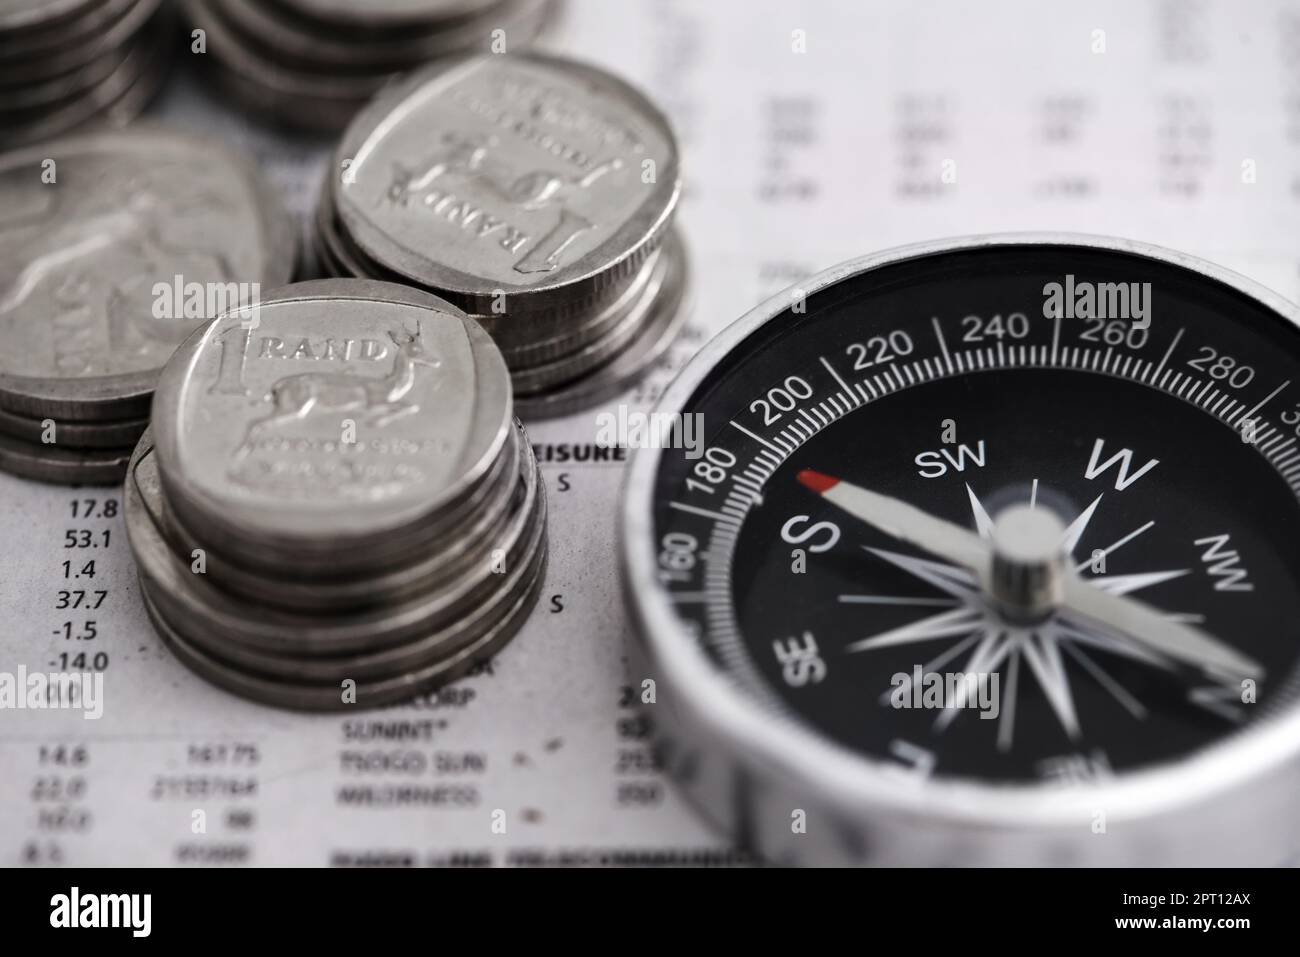 Finding my way into the market. Studio shot of coins and a compass on the business section of a newspaper Stock Photo